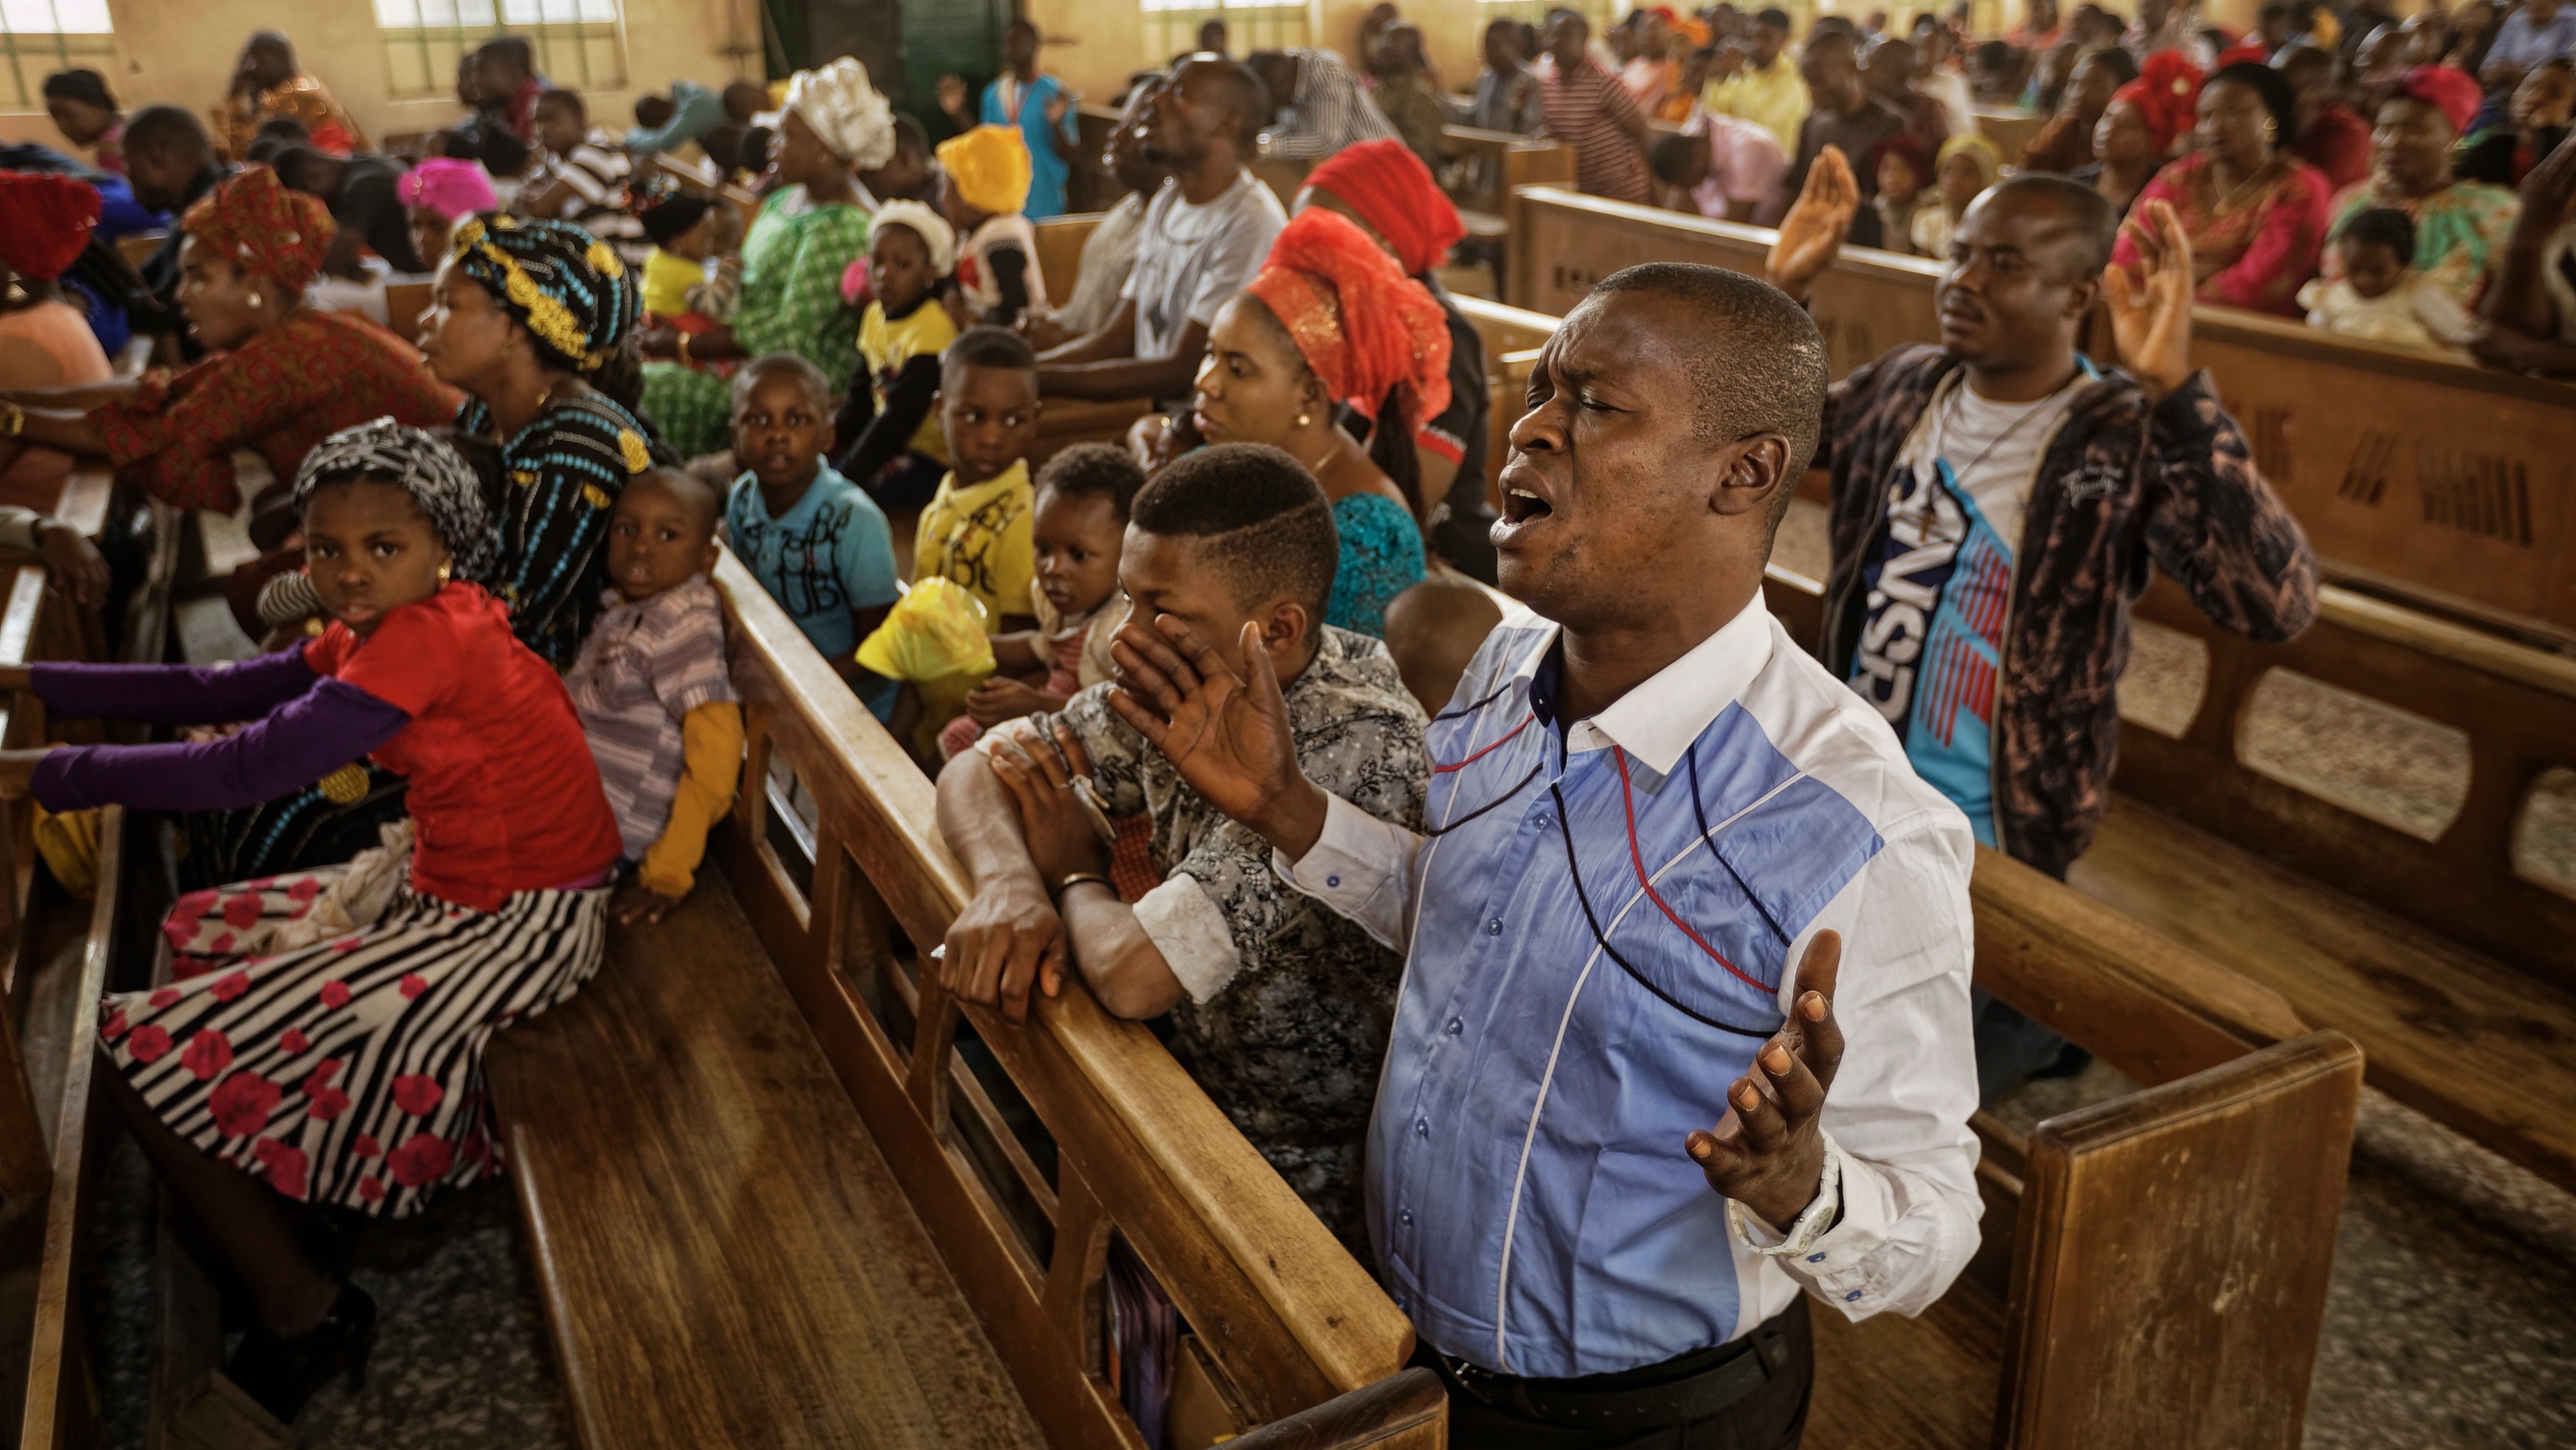 Over 1,200 Nigerian Christians Killed in the First Six Months of 2020, According to NGO Report